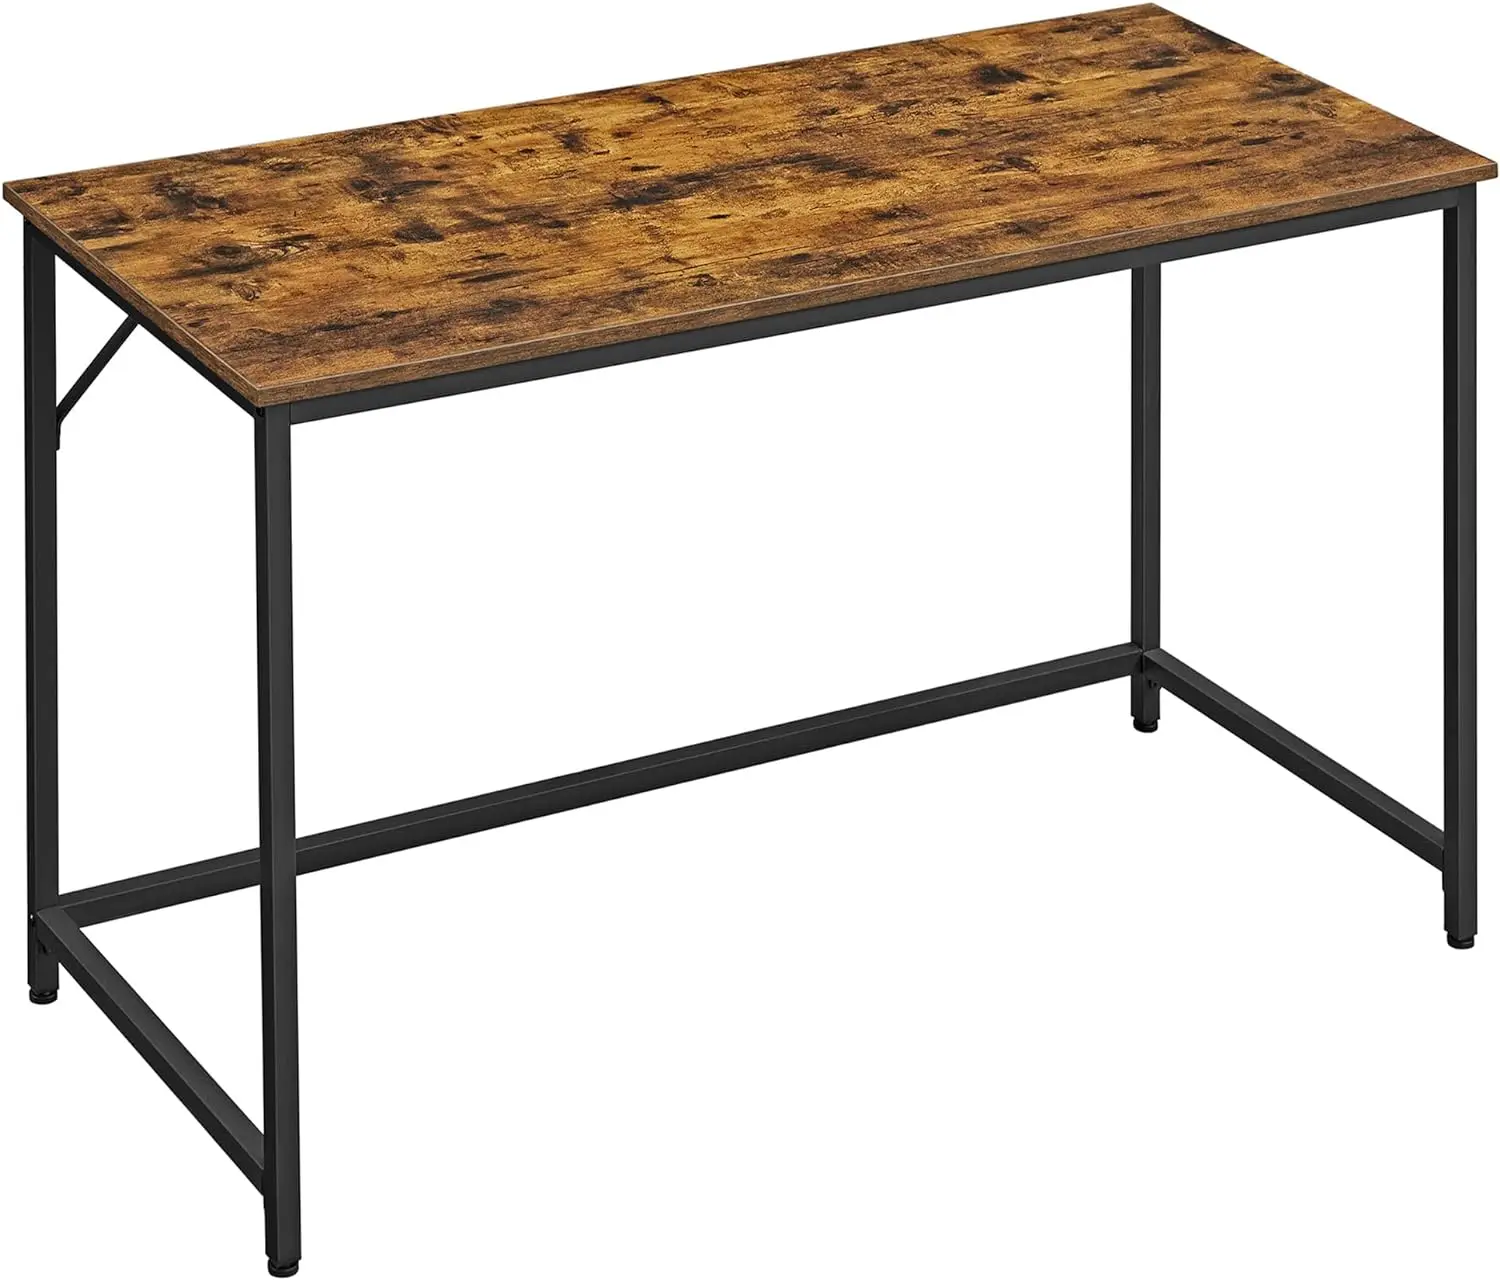 Computer Desk, Gaming Desk, Home Office Desk, for Small Spaces, 23.6 x 47.2 x 29.5 Inches, Industrial Style pca 6028 industrial computer pca 6028g2 pca 6028vg 00a1e tested